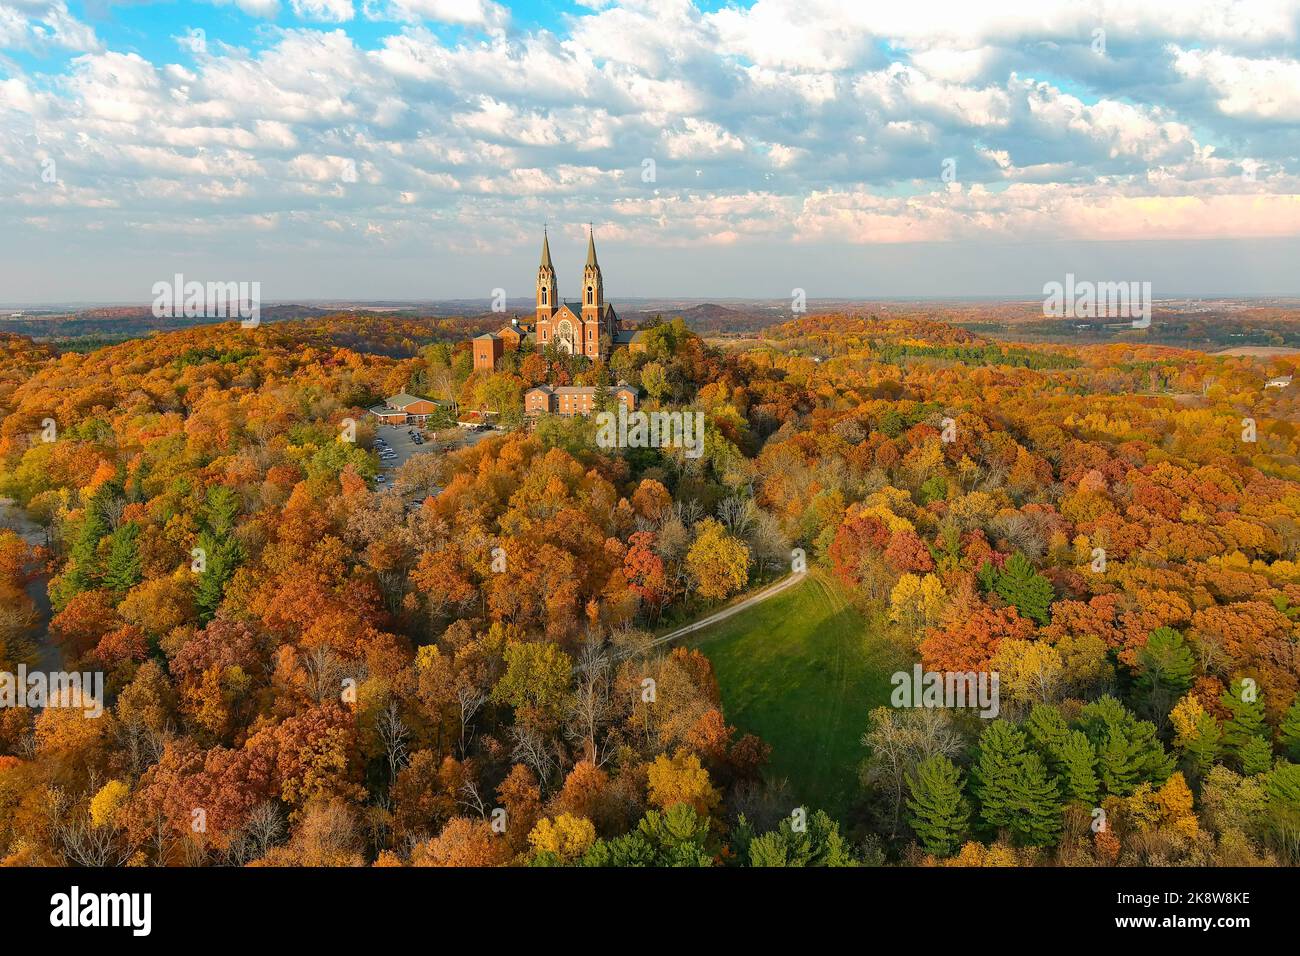 Holy Hill National Shrine of Mary church located in Wisconsin Stock Photo